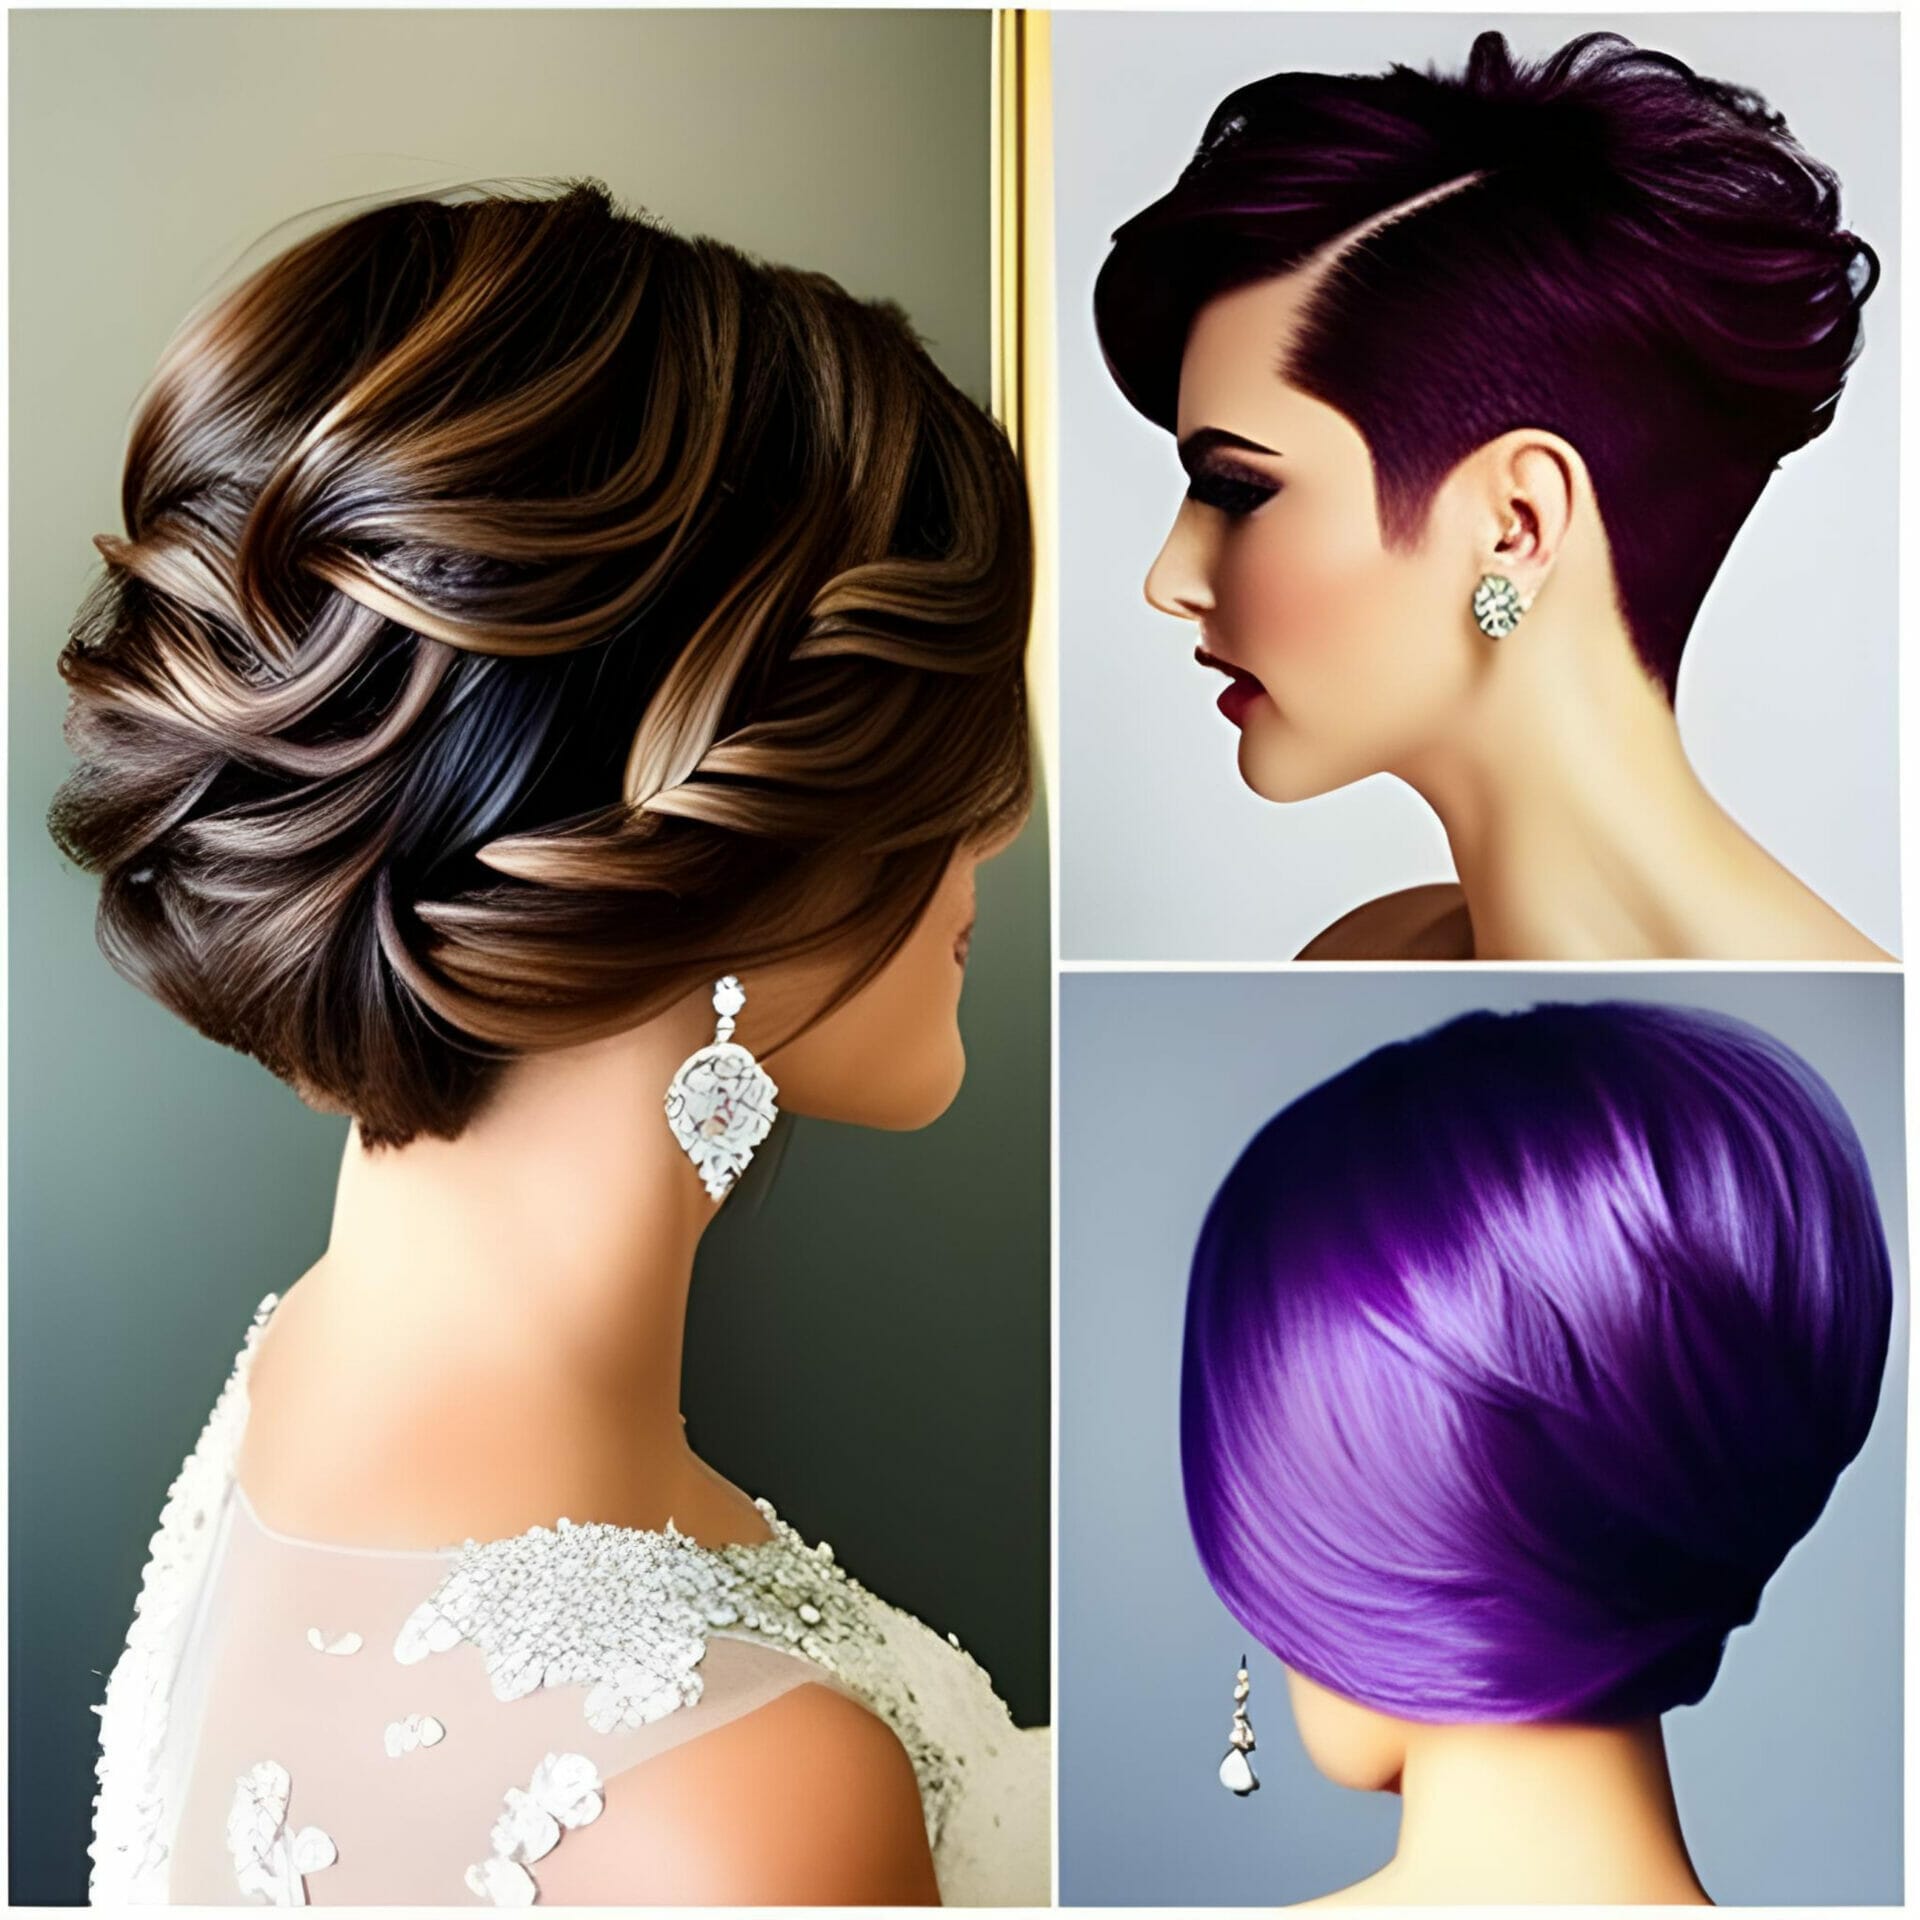 Short Hair Wedding Hairstyle Color Options